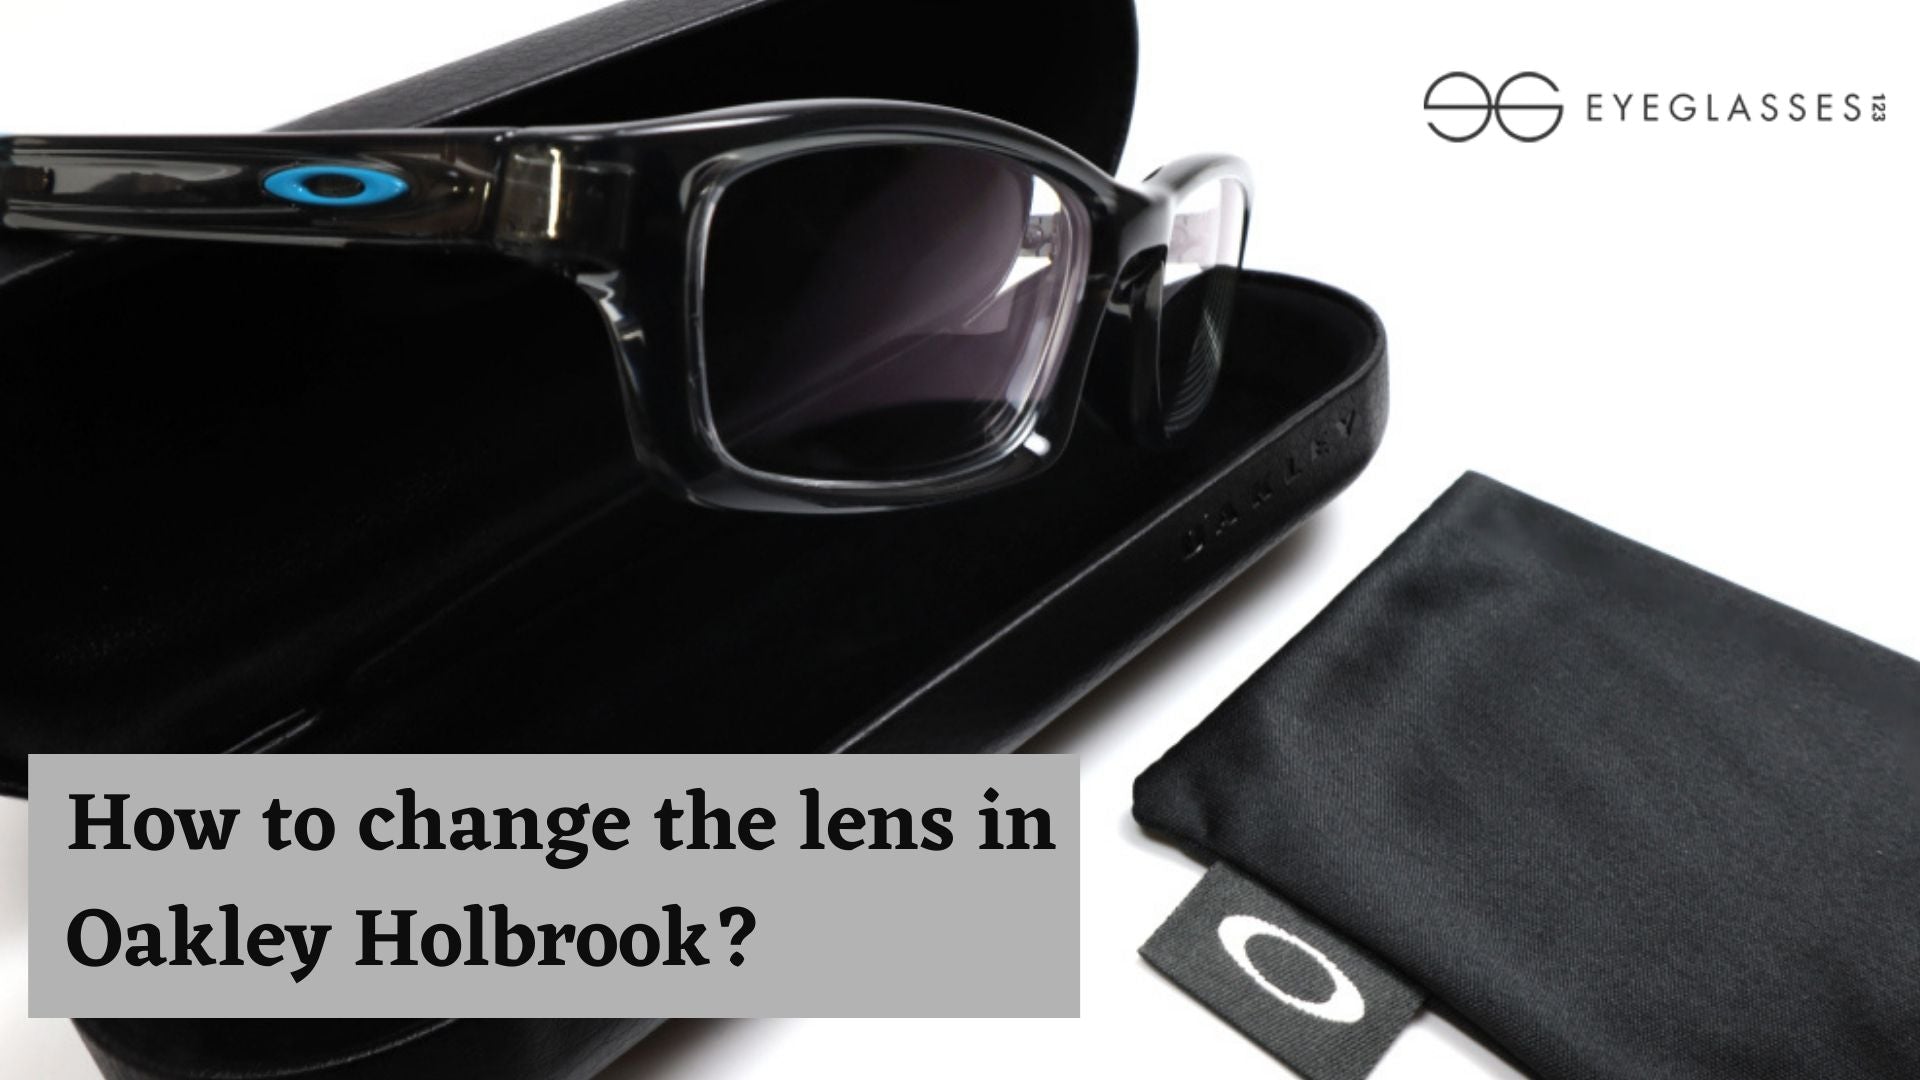 How to change the lens in Oakley Holbrook?